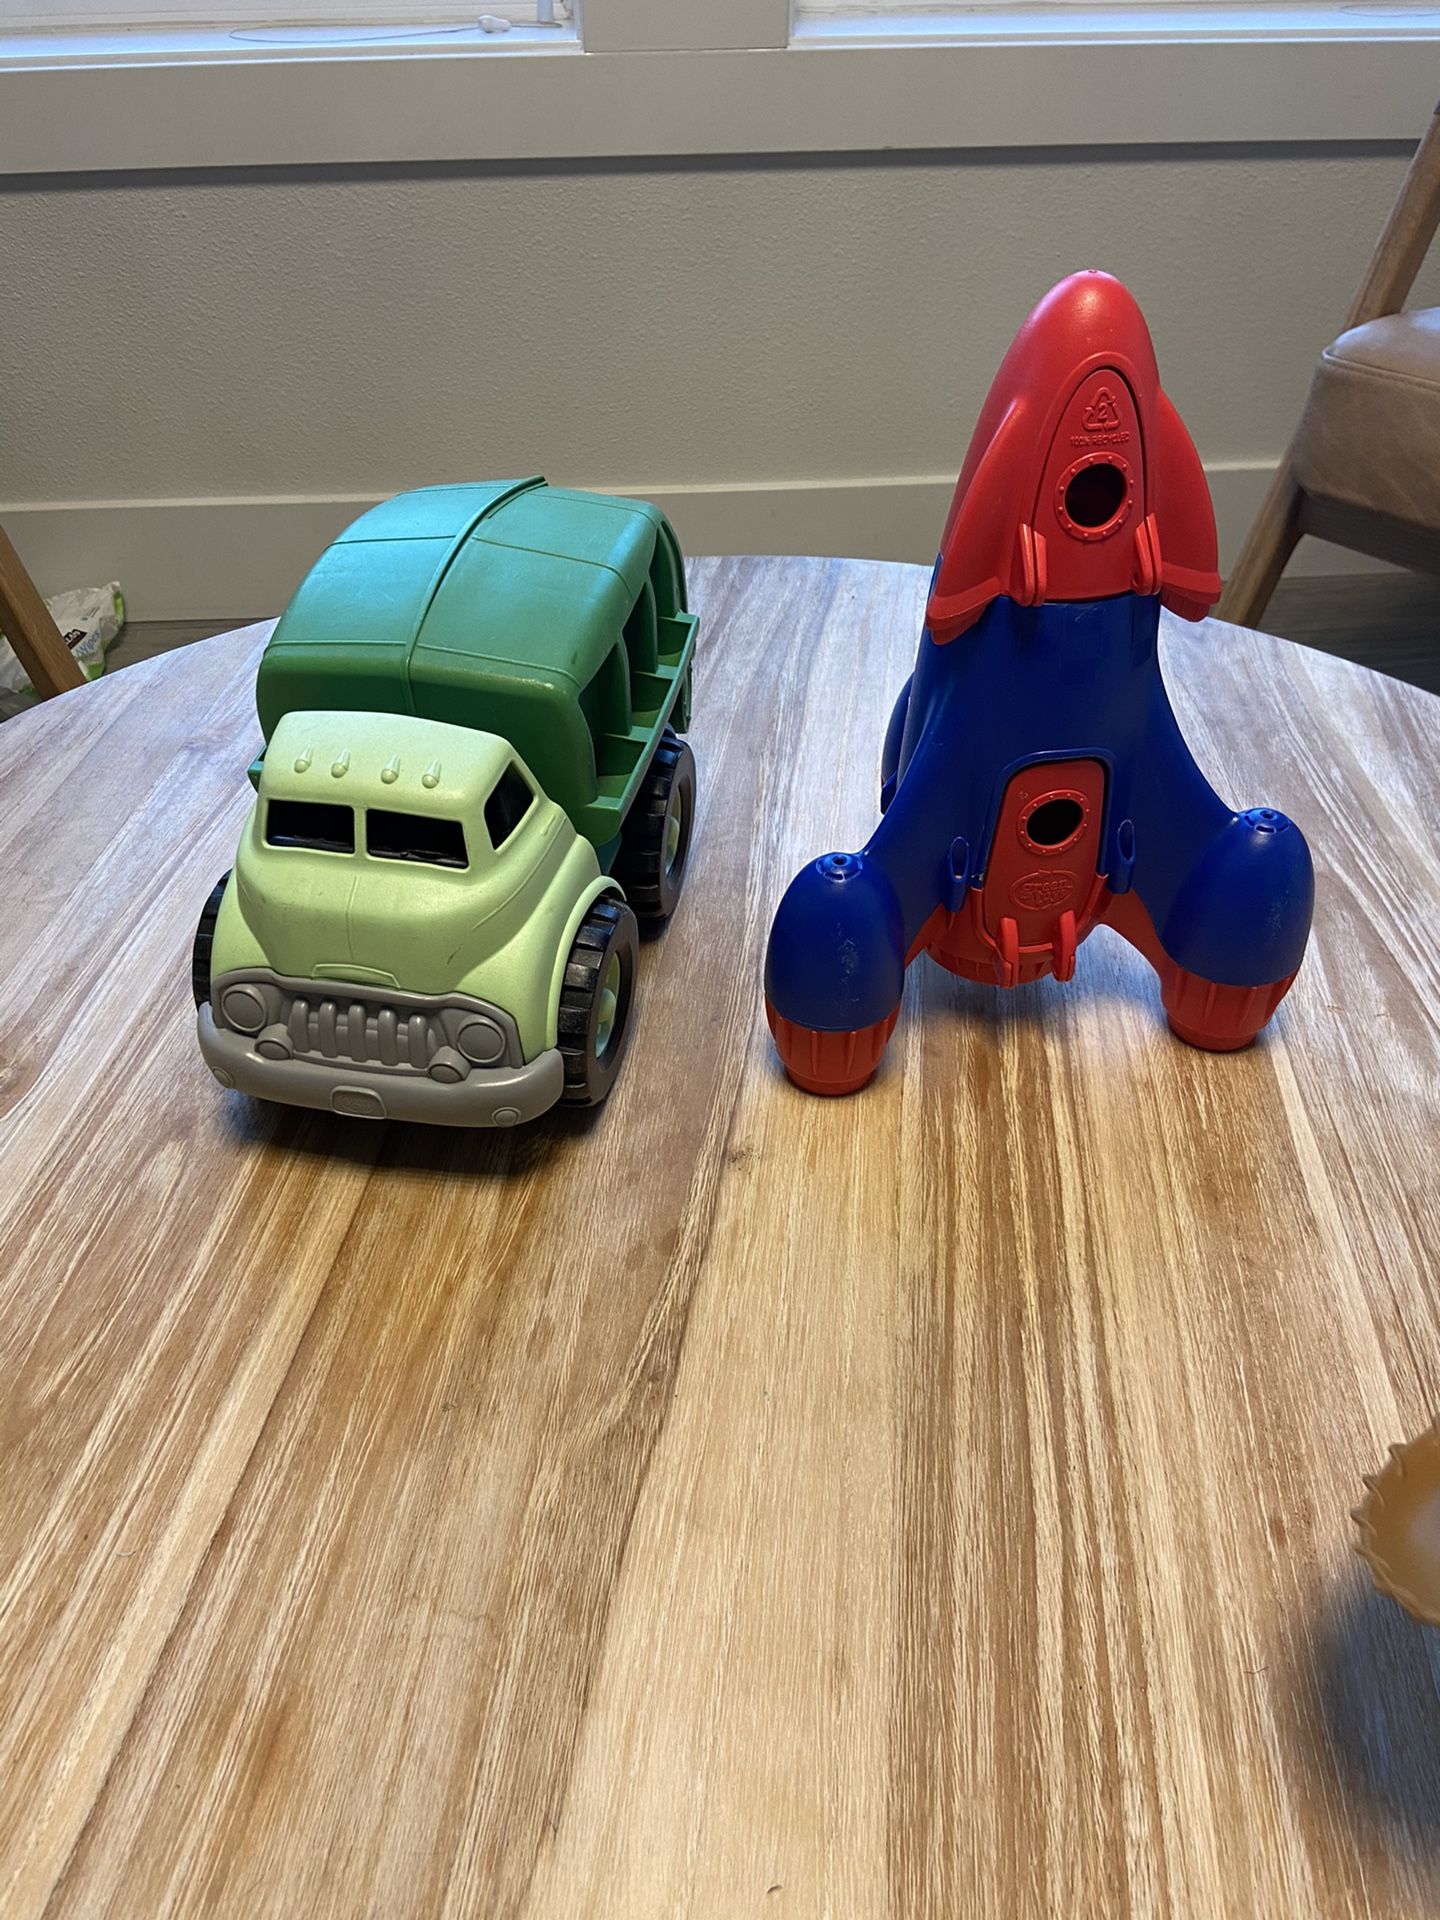 Green toy brand rocket and recycling truck